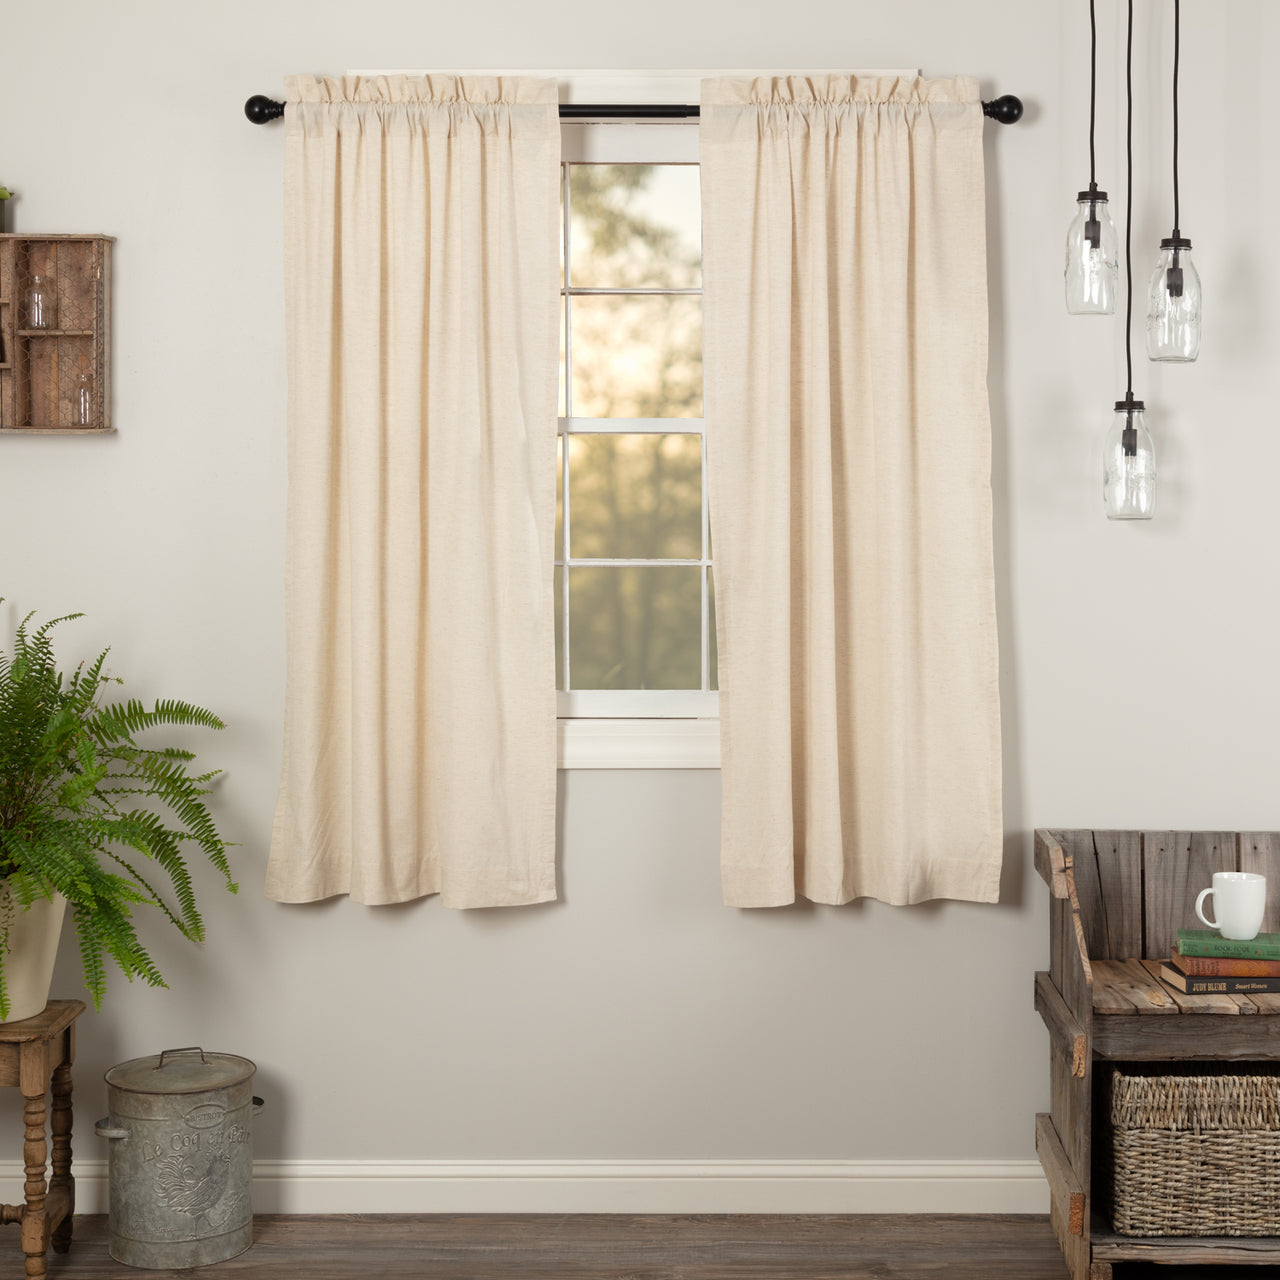 Simple Life Flax Natural Short Panel Country Style Curtain Set of 2 63"x36"